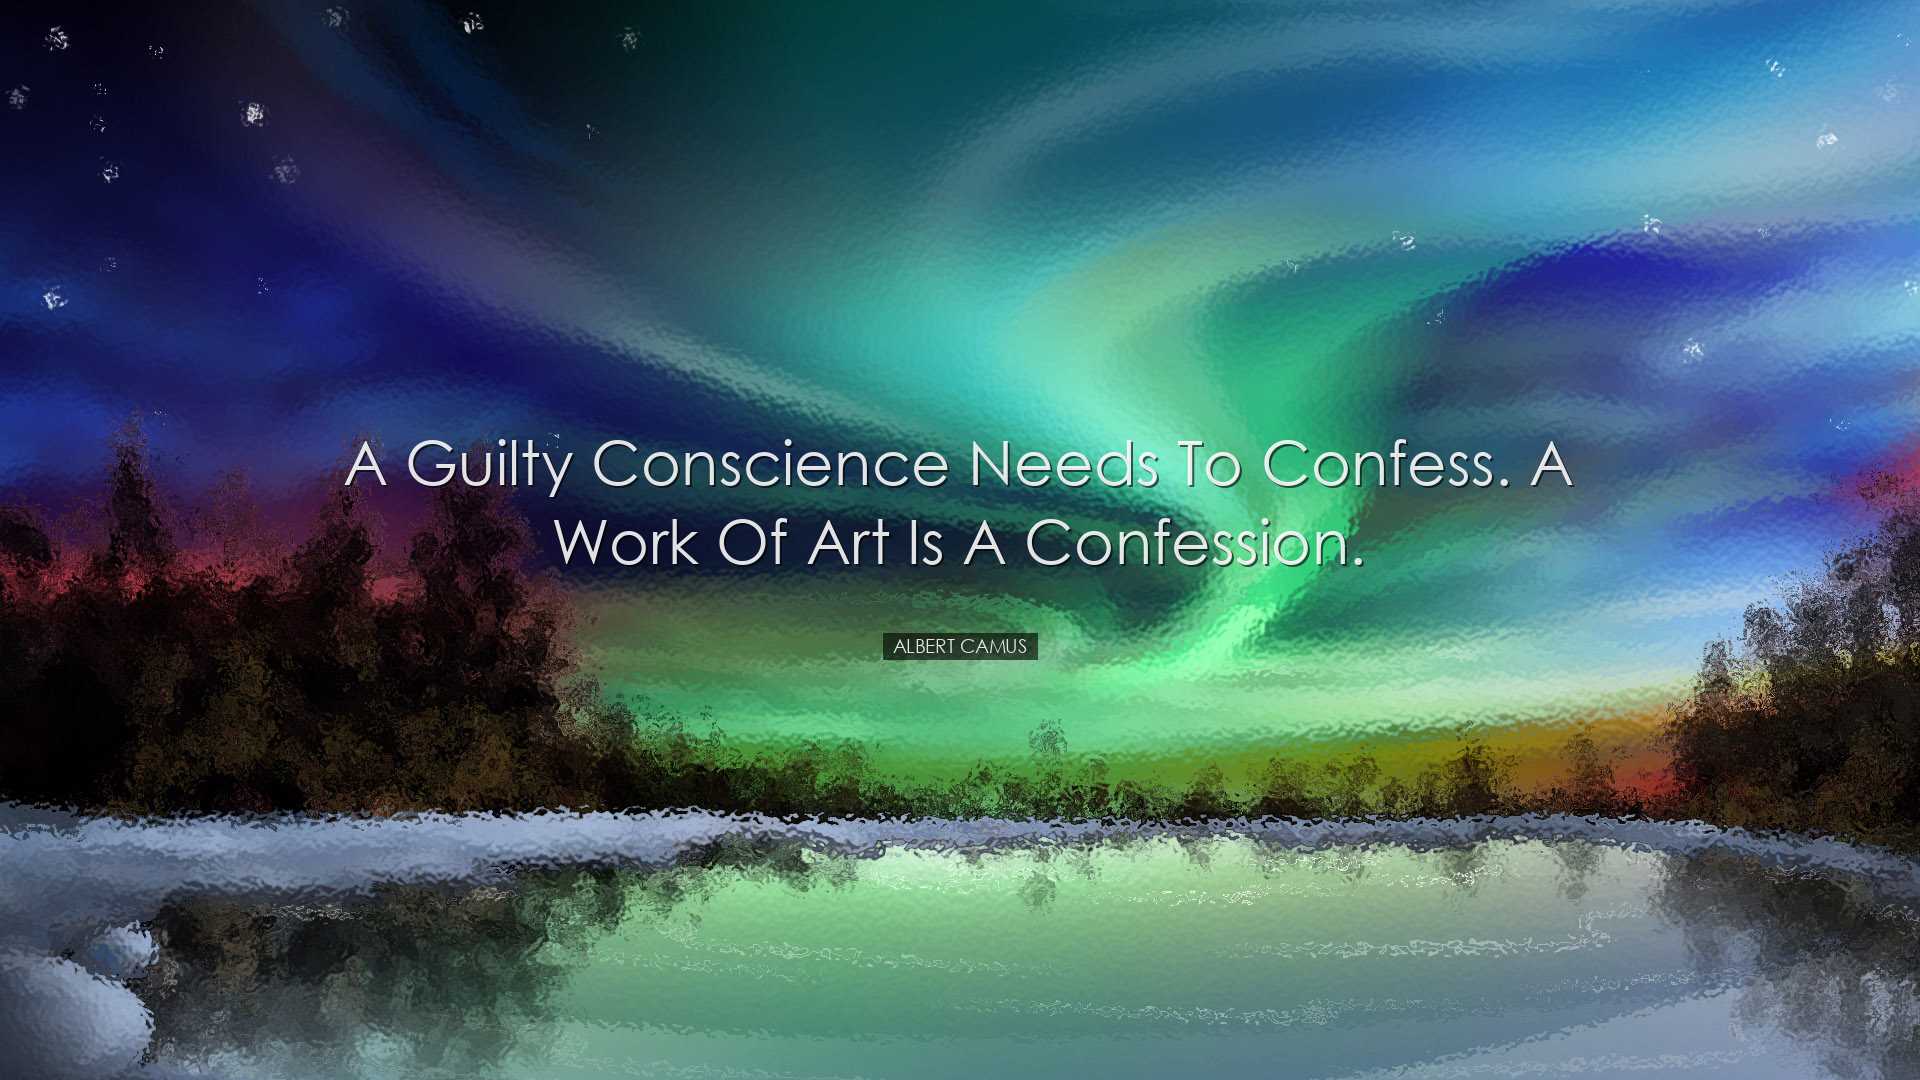 A guilty conscience needs to confess. A work of art is a confessio